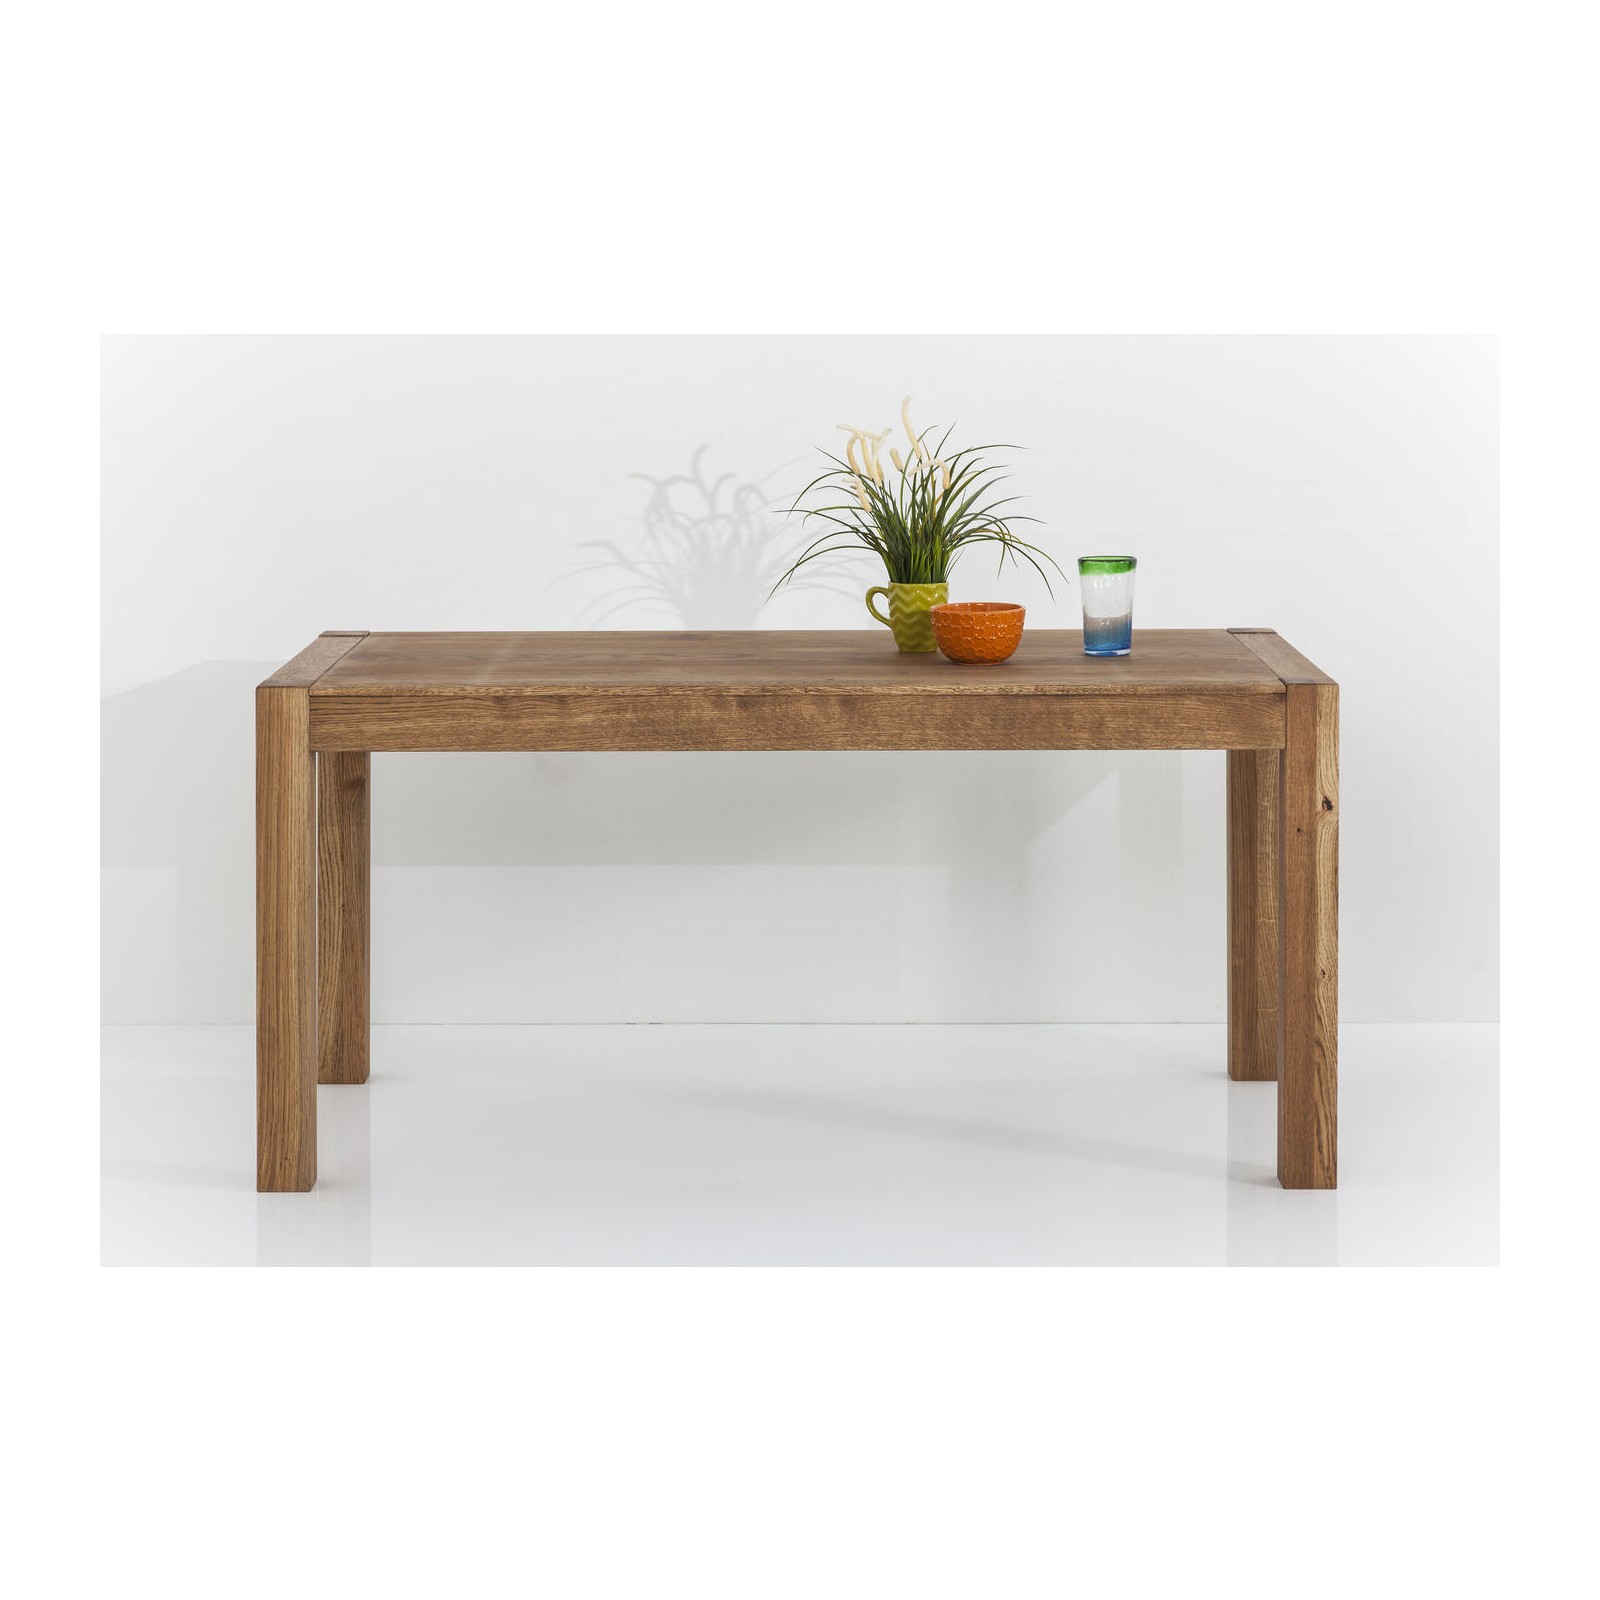 TABLE ATTENTO DINING 160X80CM KARE DESIGN